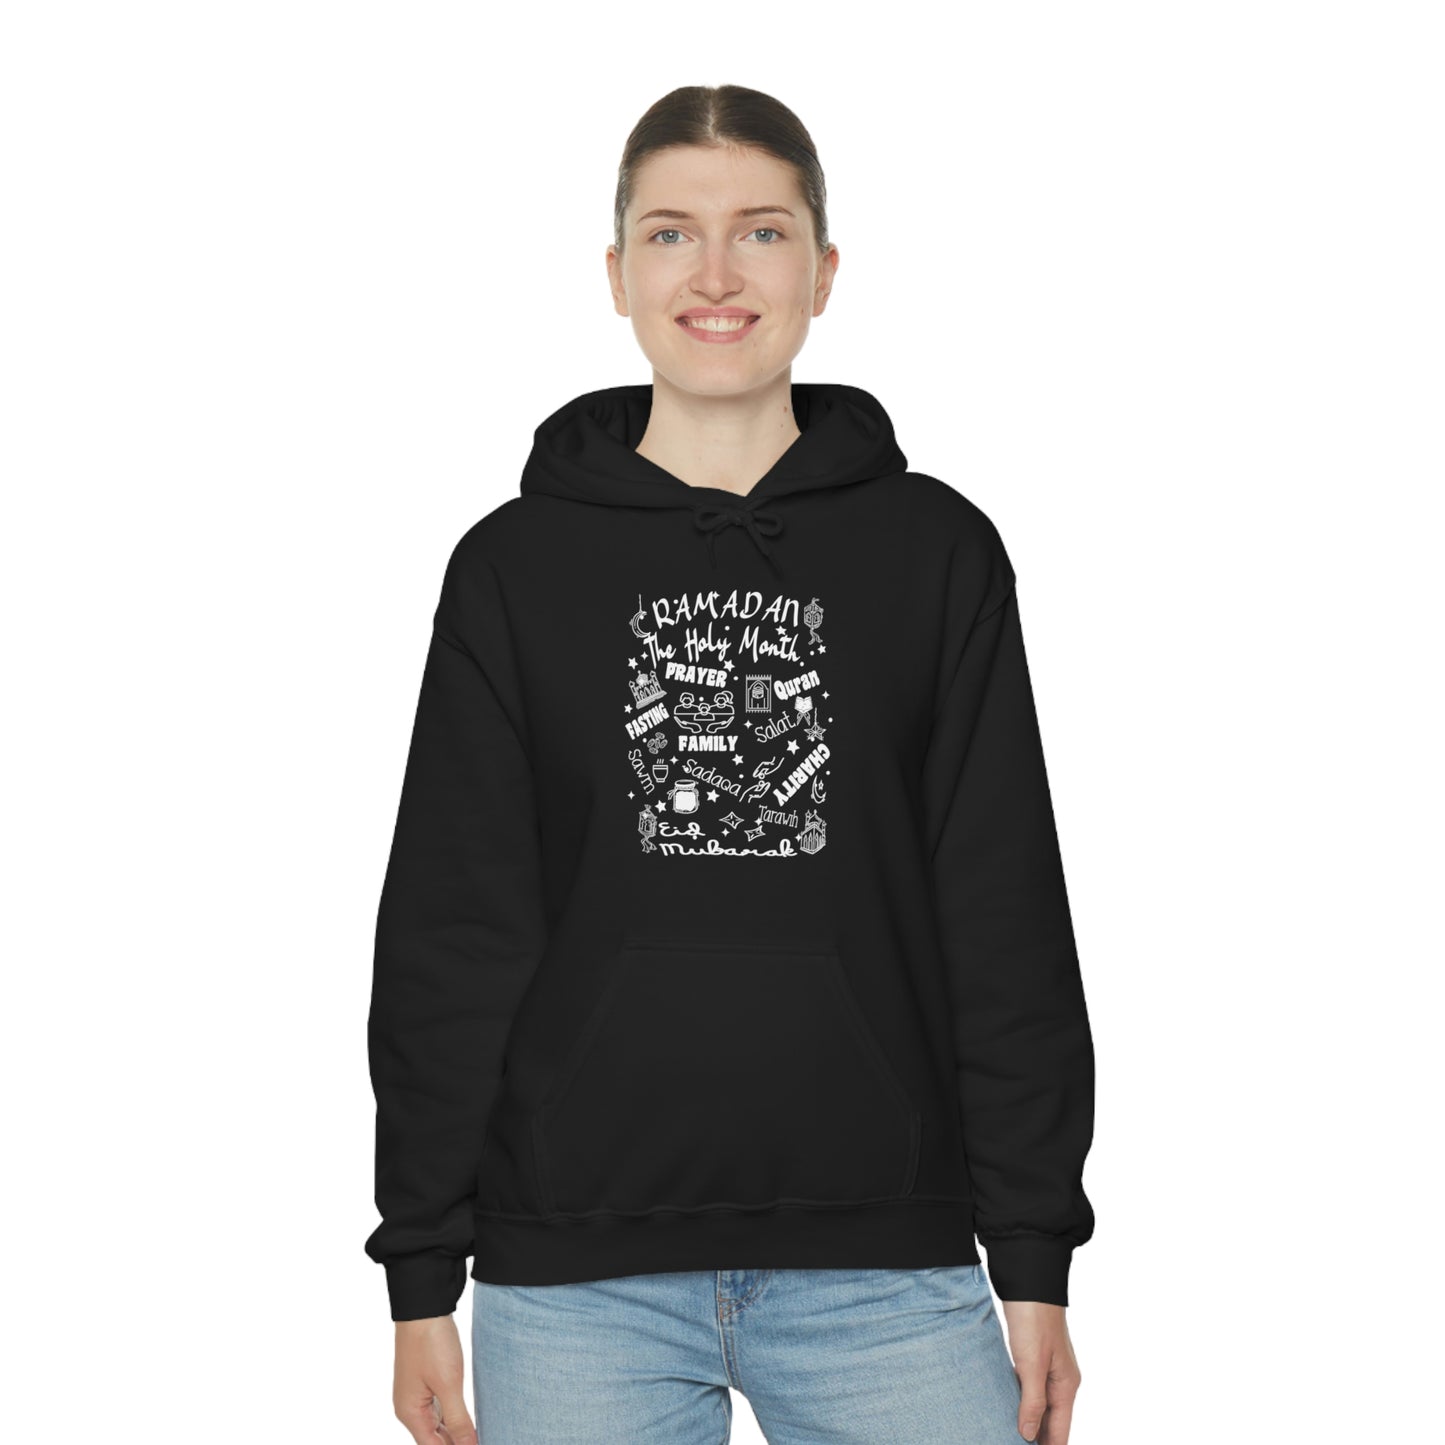 Stay stylish and show devotion to your faith with our Ramadan Kareem Design Hooded Sweatshirt. Featuring stunning graphics, perfect for all ages